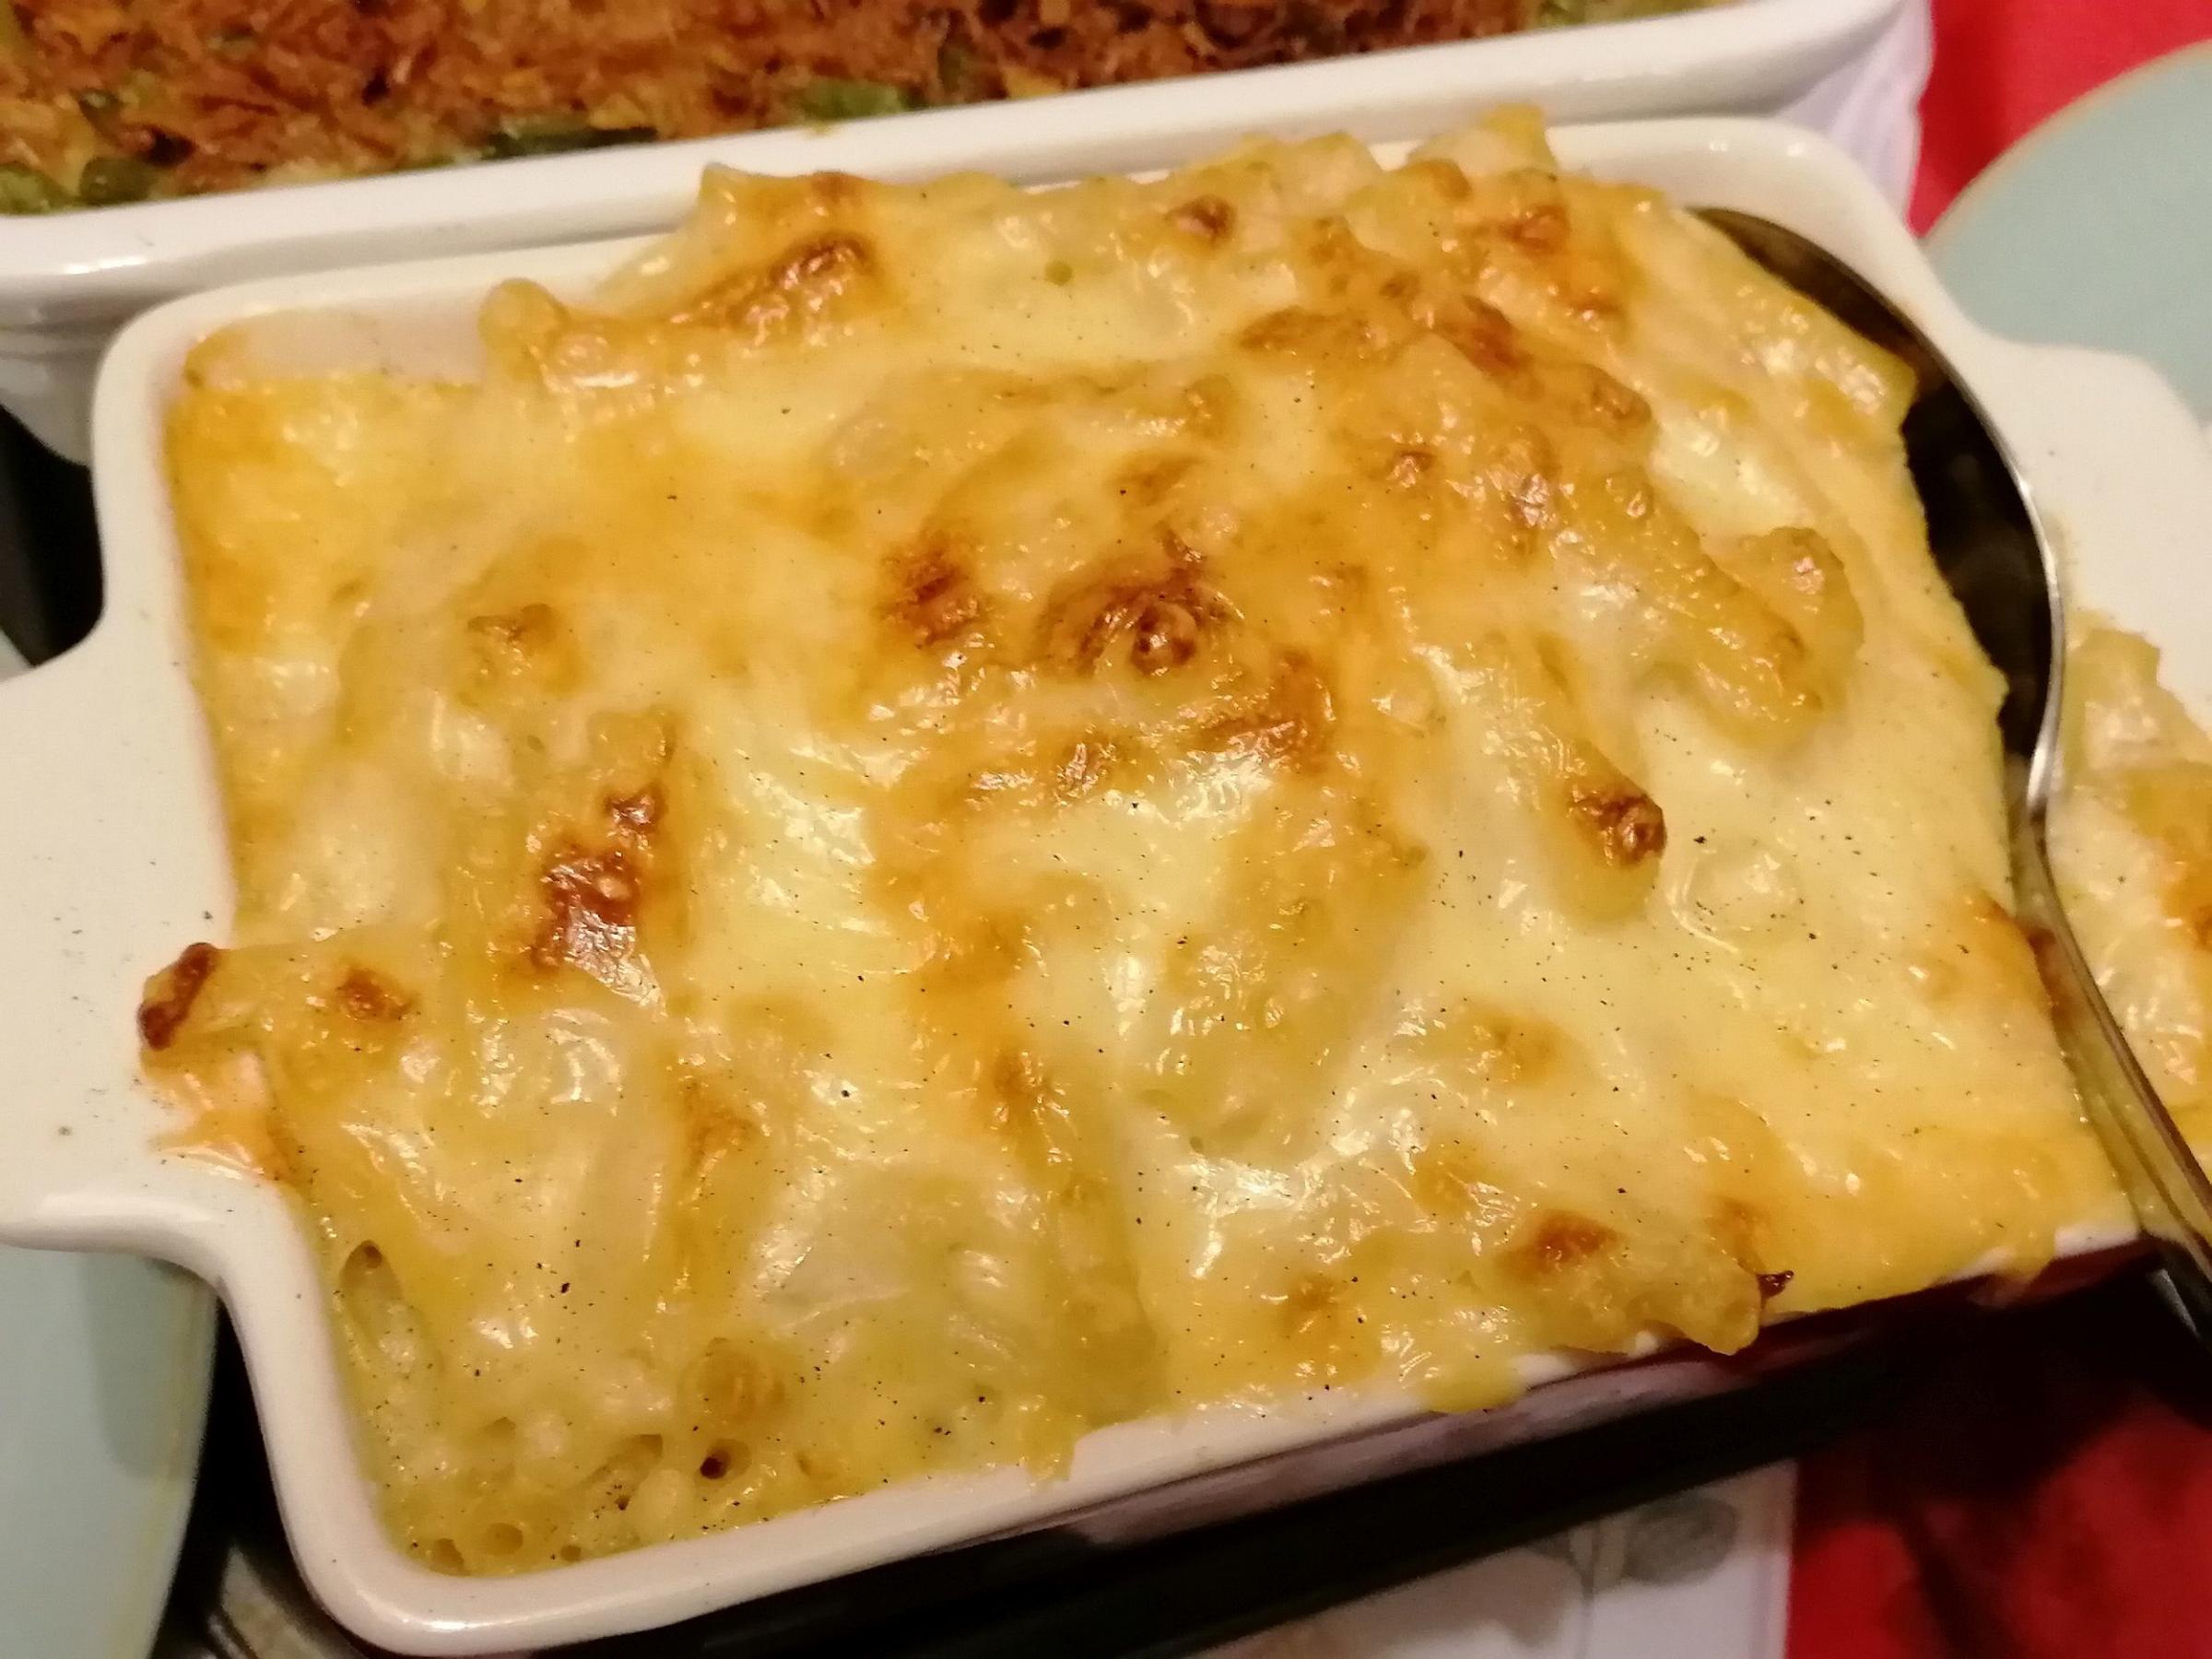 The gooey mac and cheese was a warming side dish